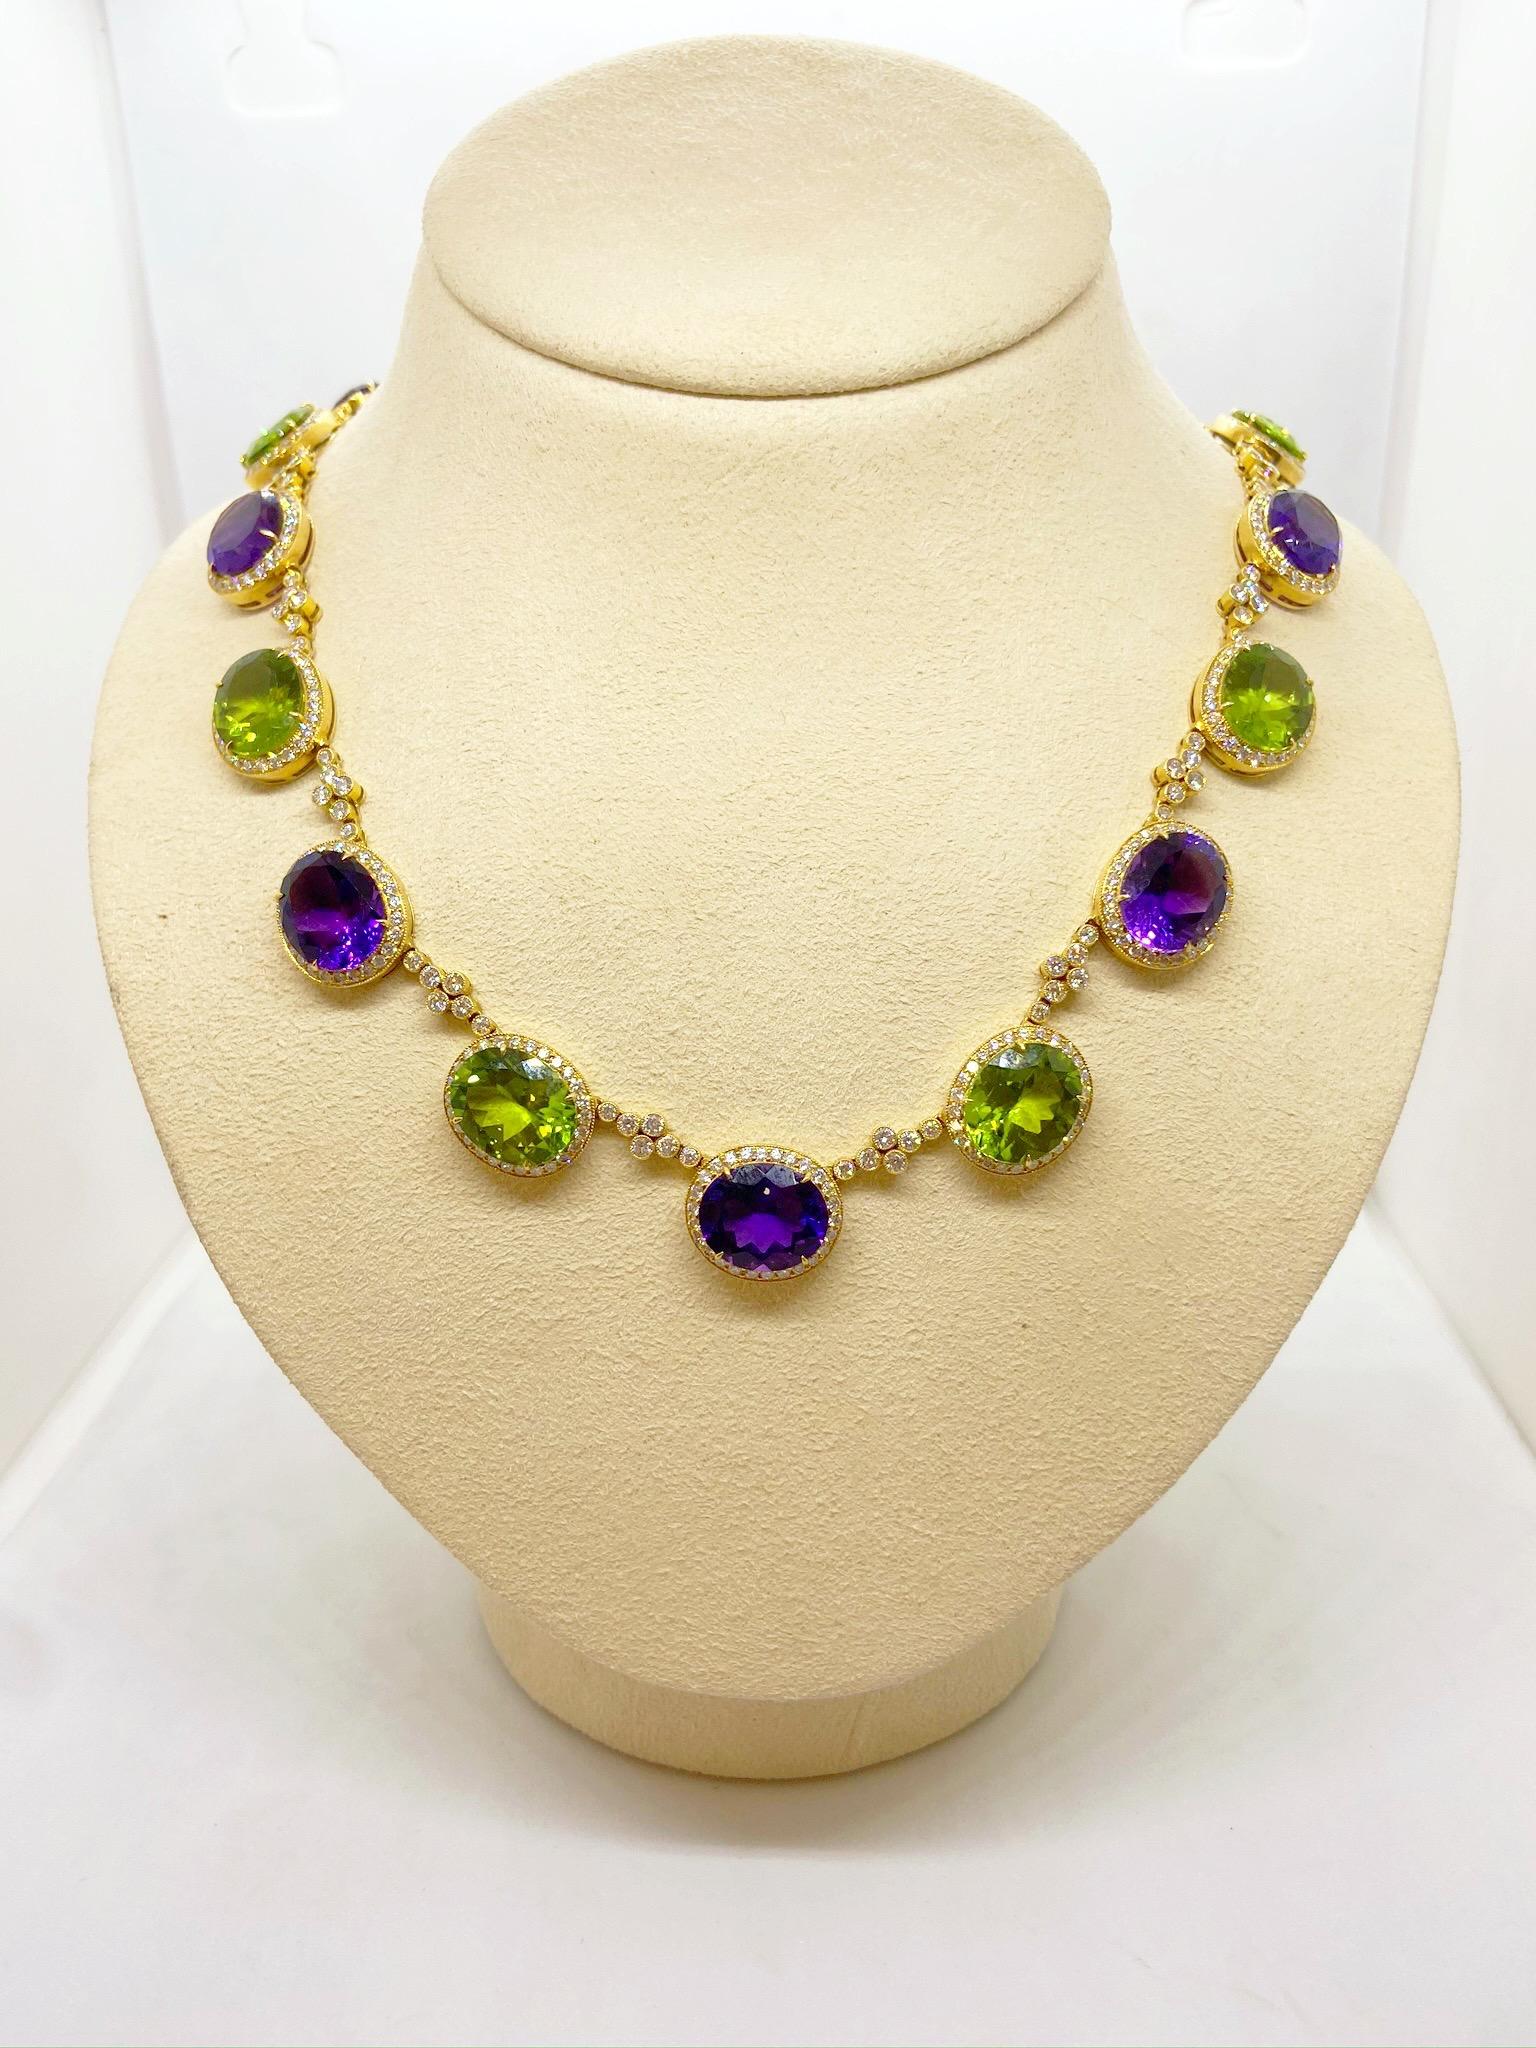 Oval Cut 18KT YG Necklace with Diamond 8.25CT's, Amethyst 32.54Ct., Peridot 37.07Ct. For Sale